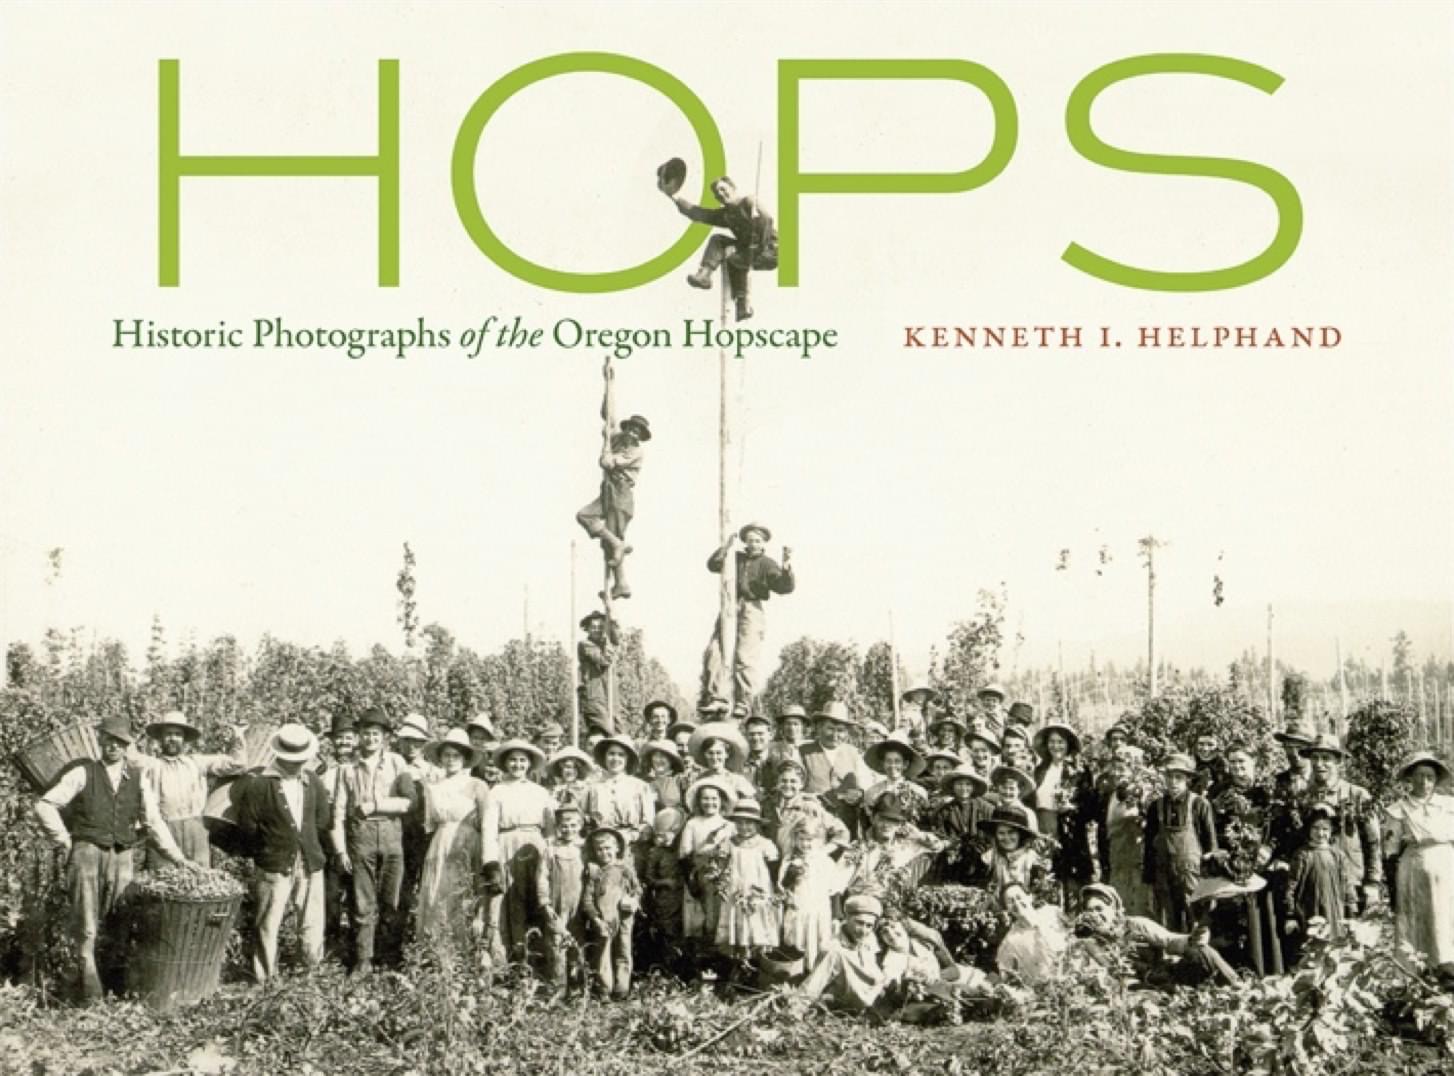 Pickers with men on poles, 1930